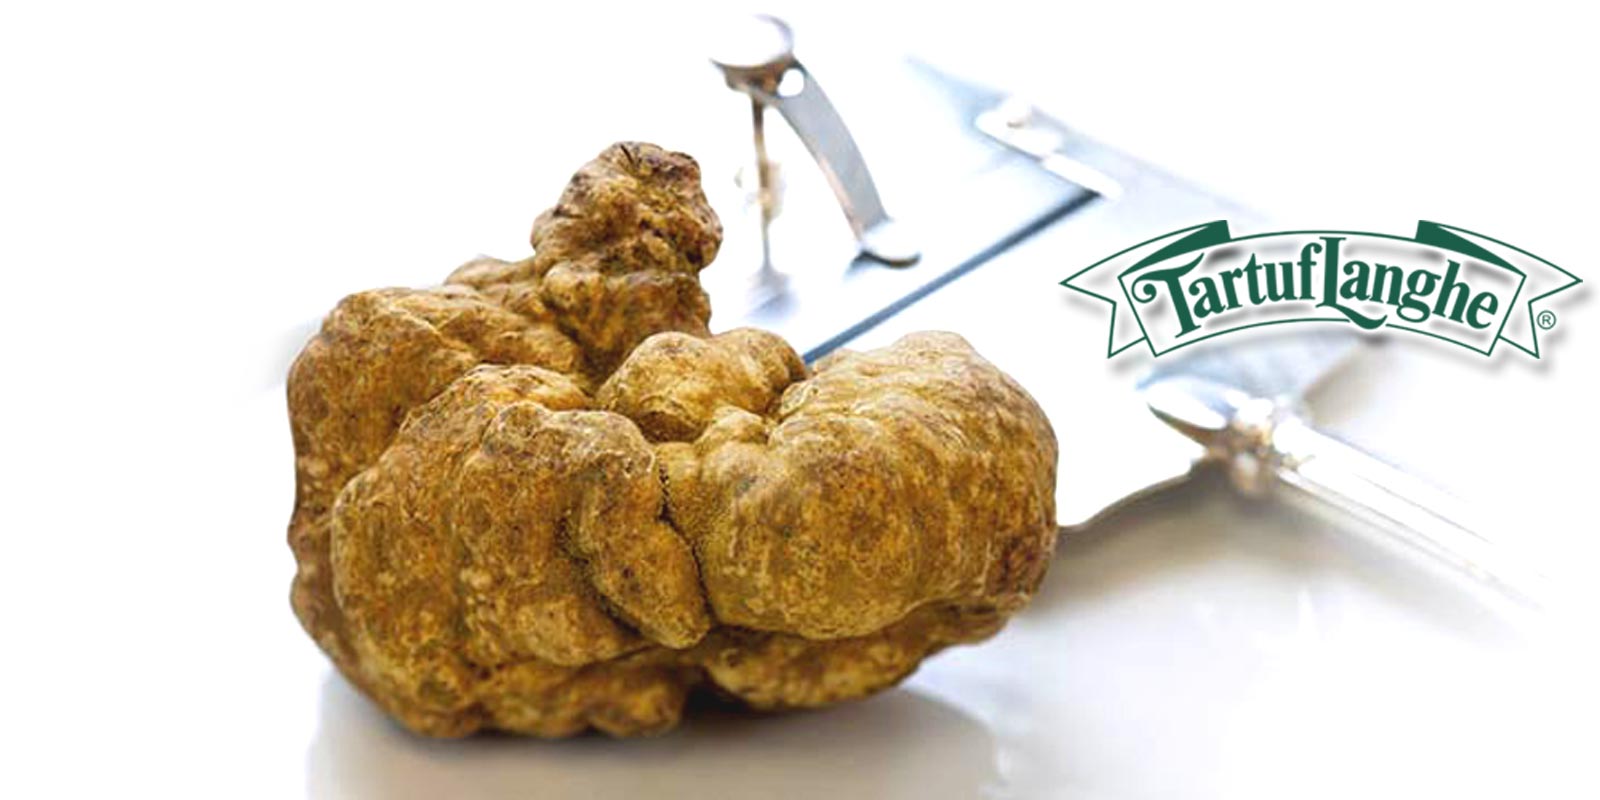 Tartuflanghe products Since 1968, Tartuflanghe has been producing and distributing truffle and truffle products. They are characterized by high taste and manufacturing quality.